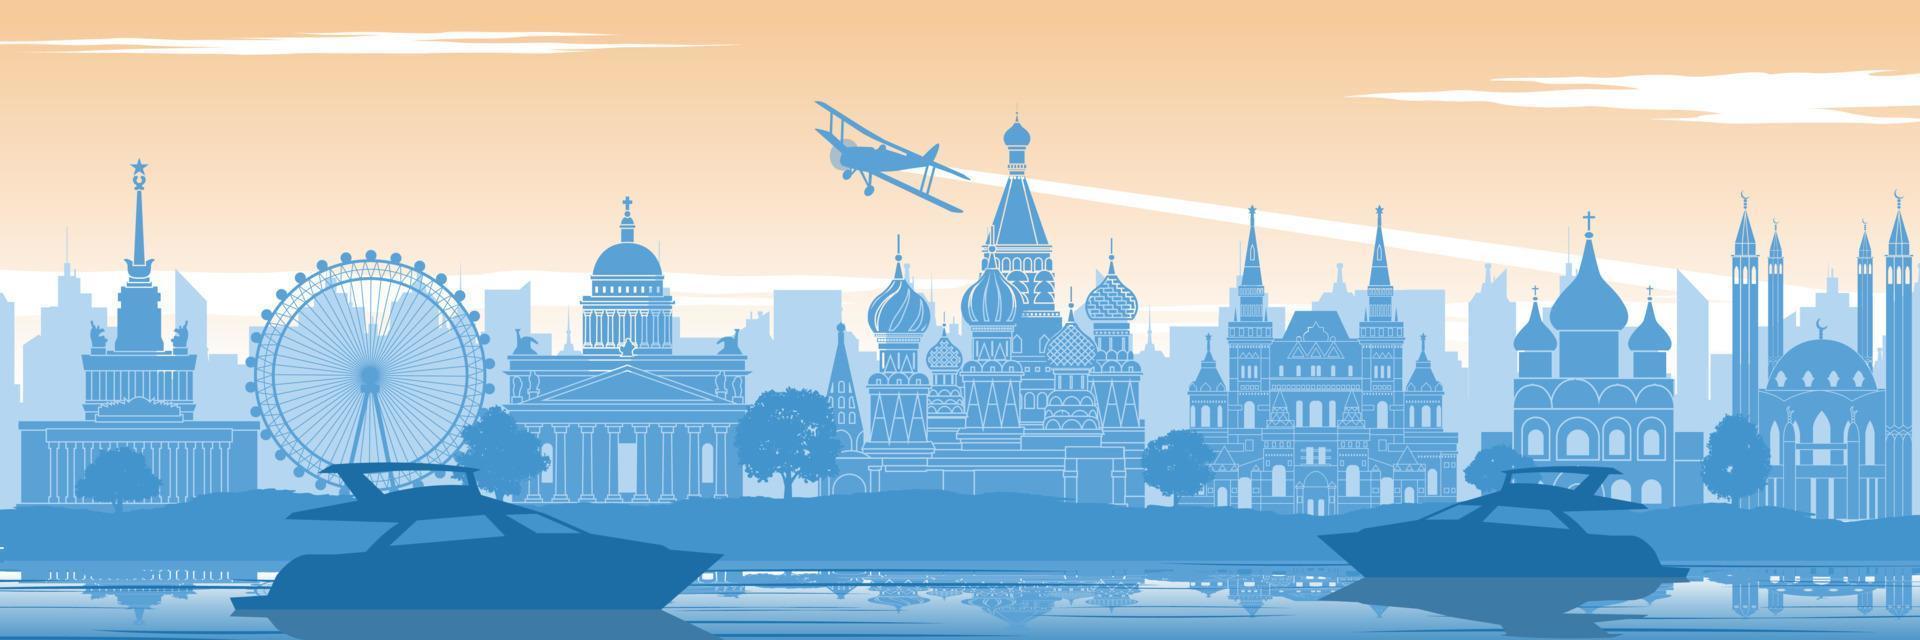 Russia famous landmark in back of river and yacht in scenery style silhouette design in blue and orange yellow color vector